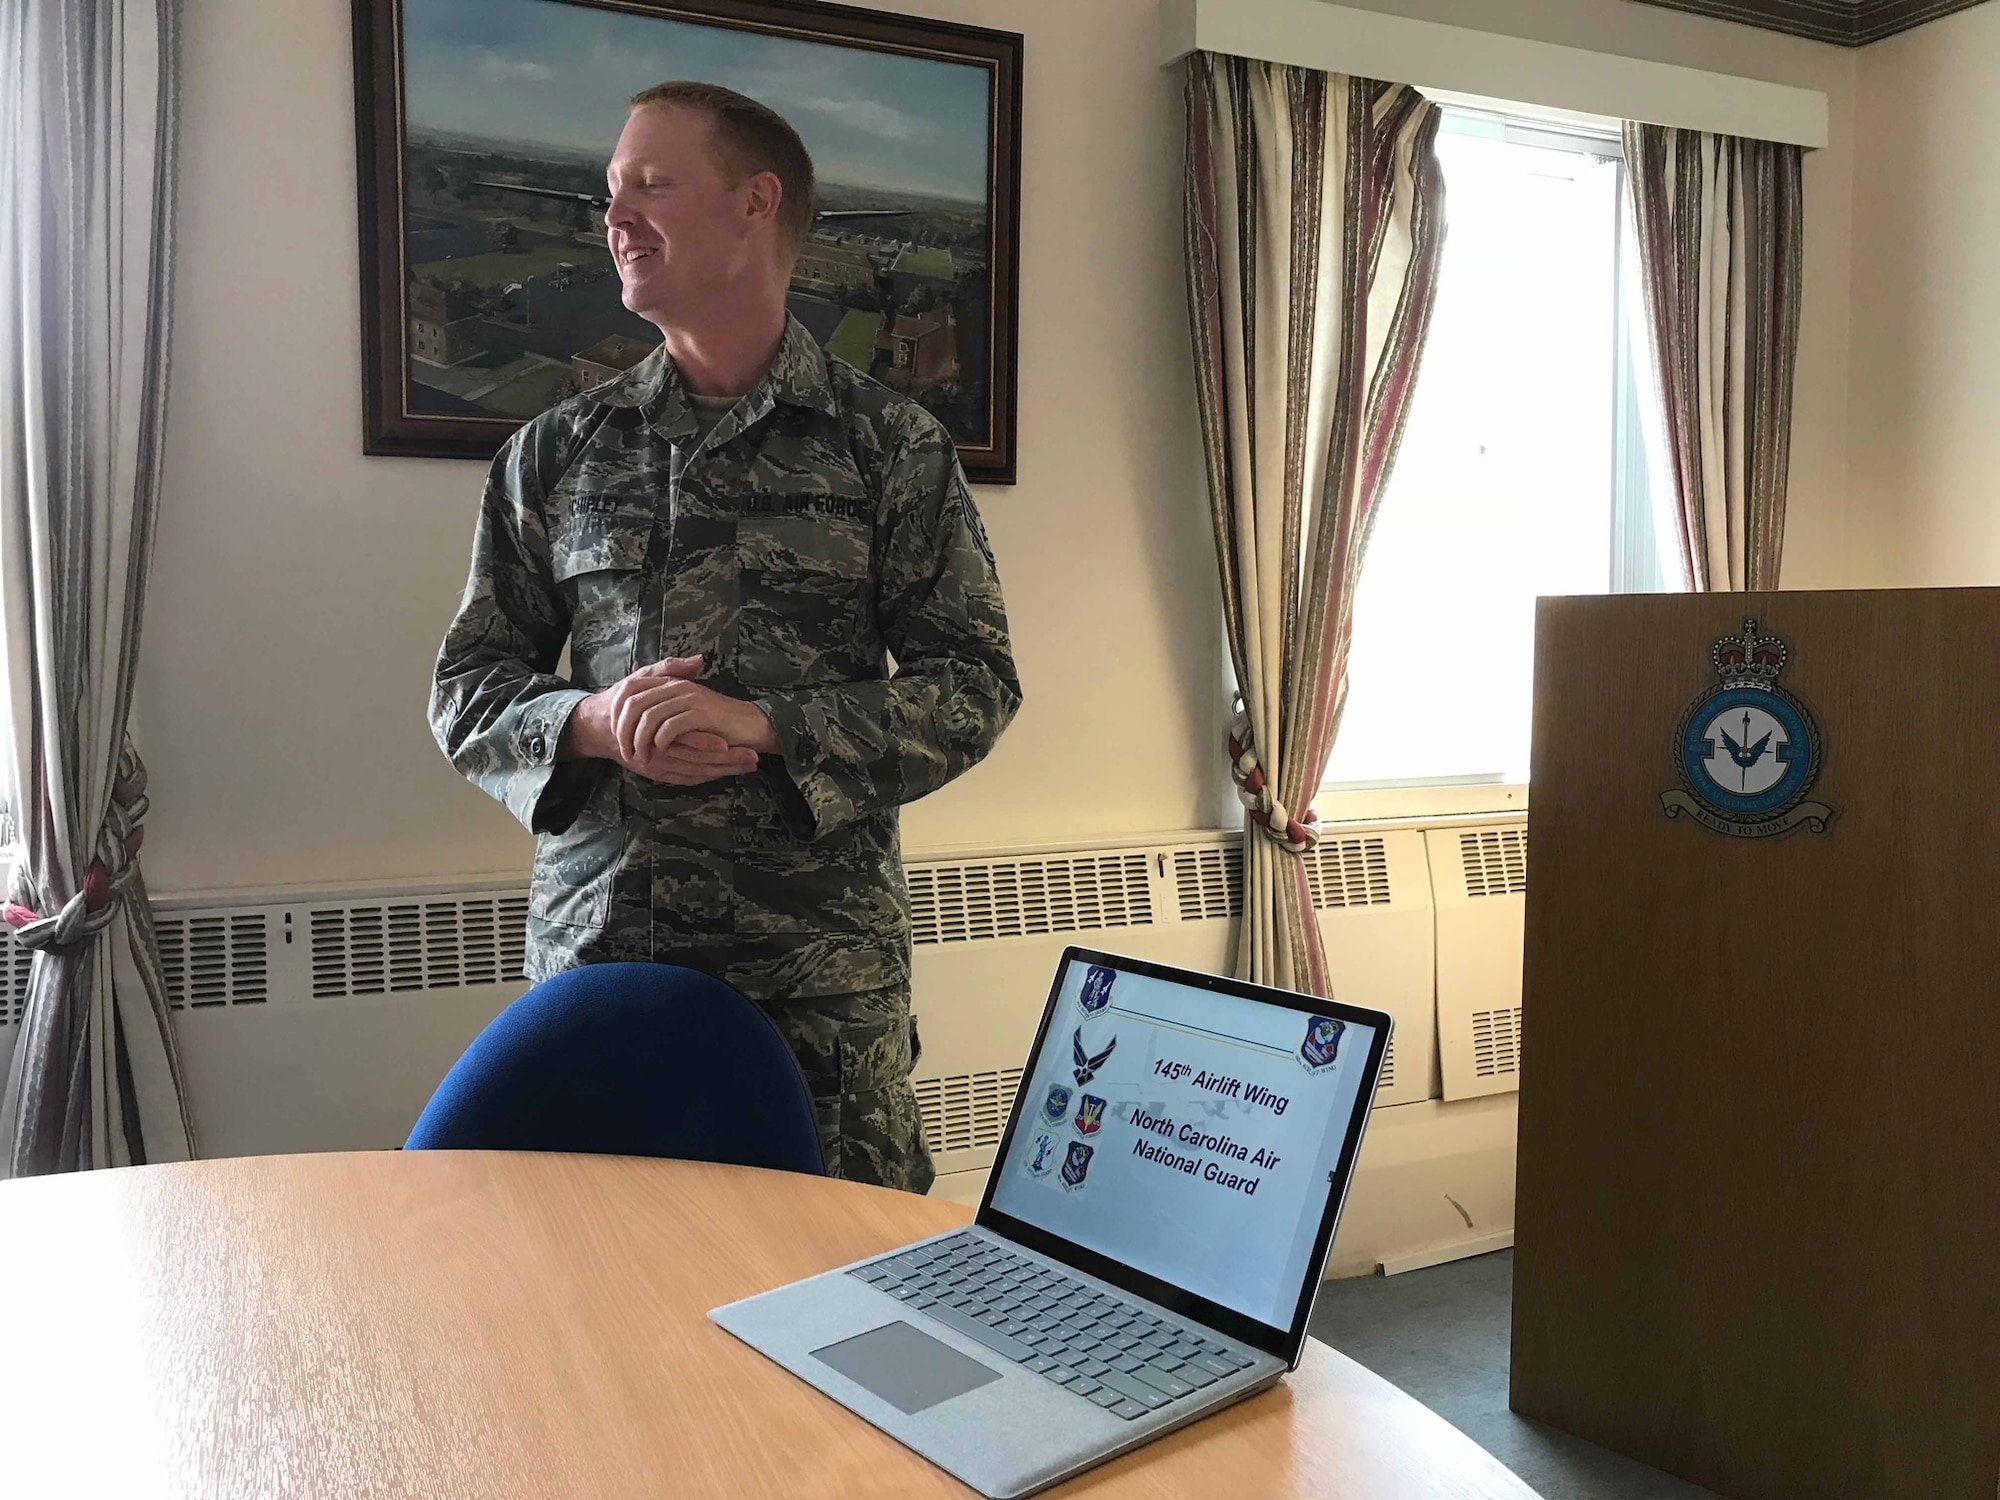 U.S. Air Force Staff Sgt. Jason Chipley, 145th Logistics Readiness Squadron, presents a briefing about the North Carolina Air National Guard to the 4624 Squadron Royal Air Force Reserves, Oxfordshire, United Kingdom, July 19, 2018. The Military Reserve Exchange Program provides National Guard and Reserve Participants training associated with mobilization duties while enhancing their ability to work and communicate with military individuals of the host nation.